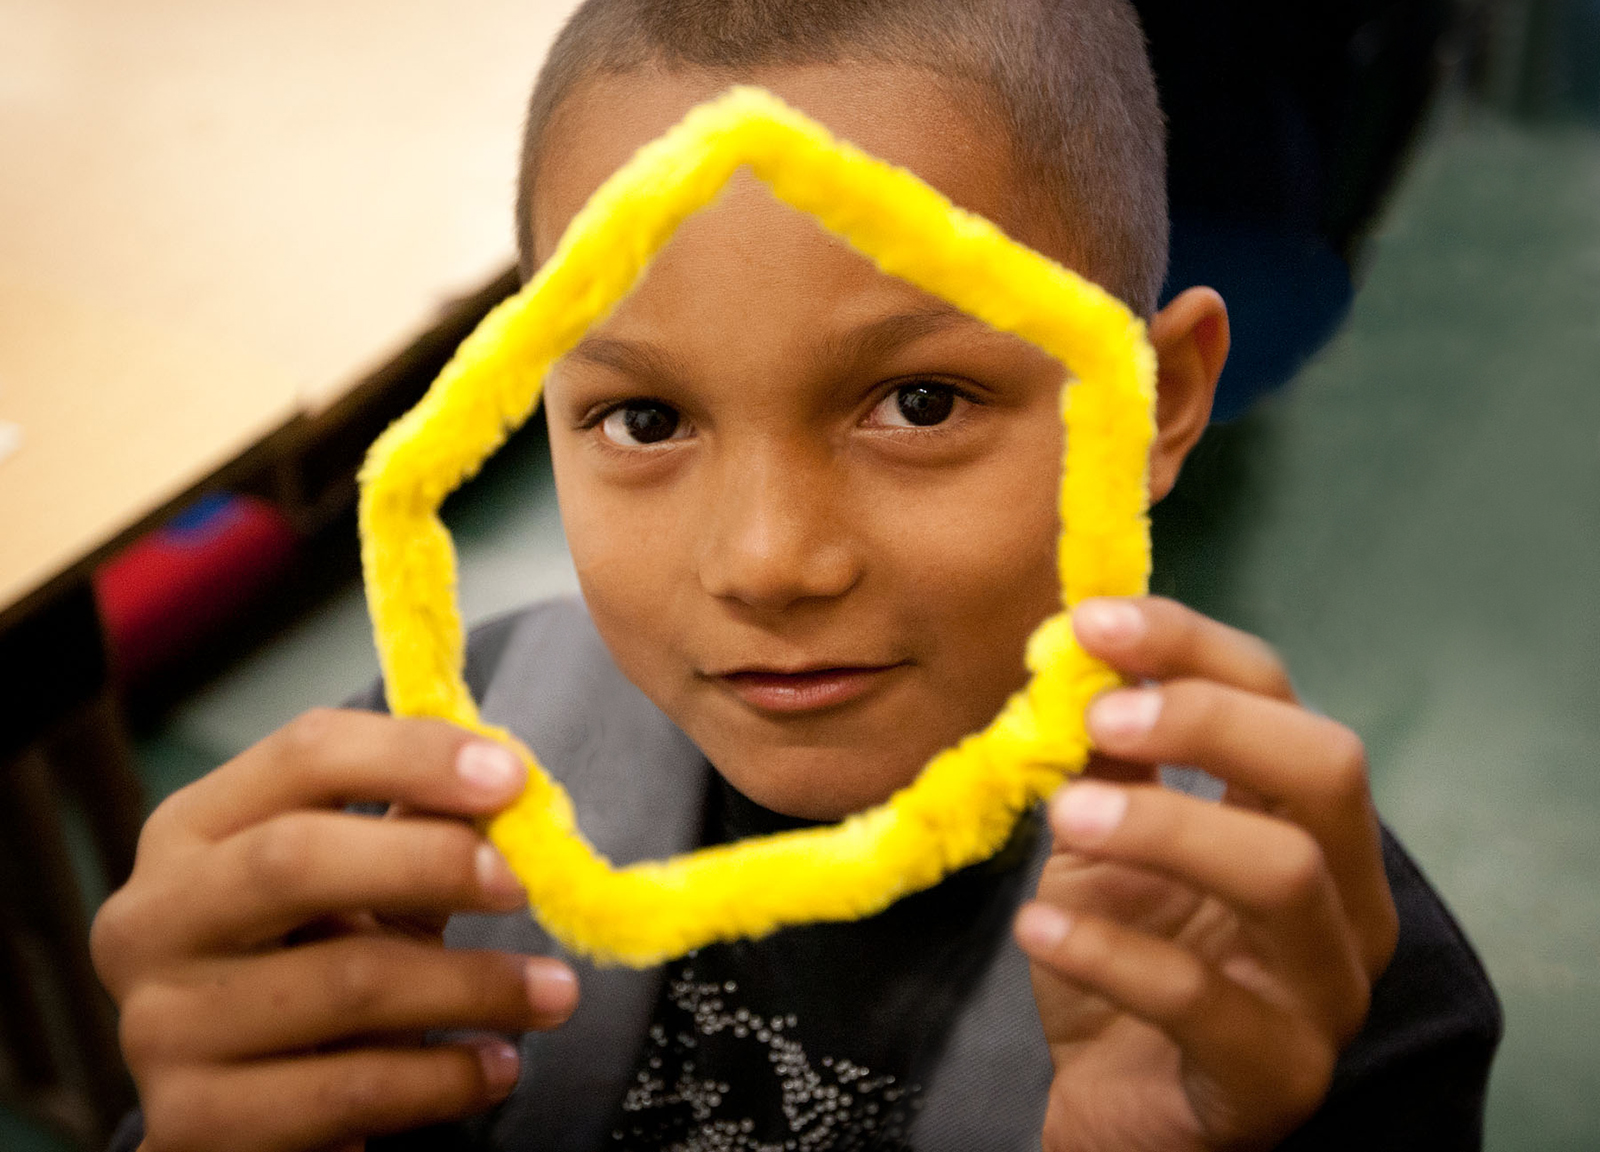 Young boy holds up and shows off a bright-yellow, fuzzy pipe cleaner he formed into a hexagon shape.